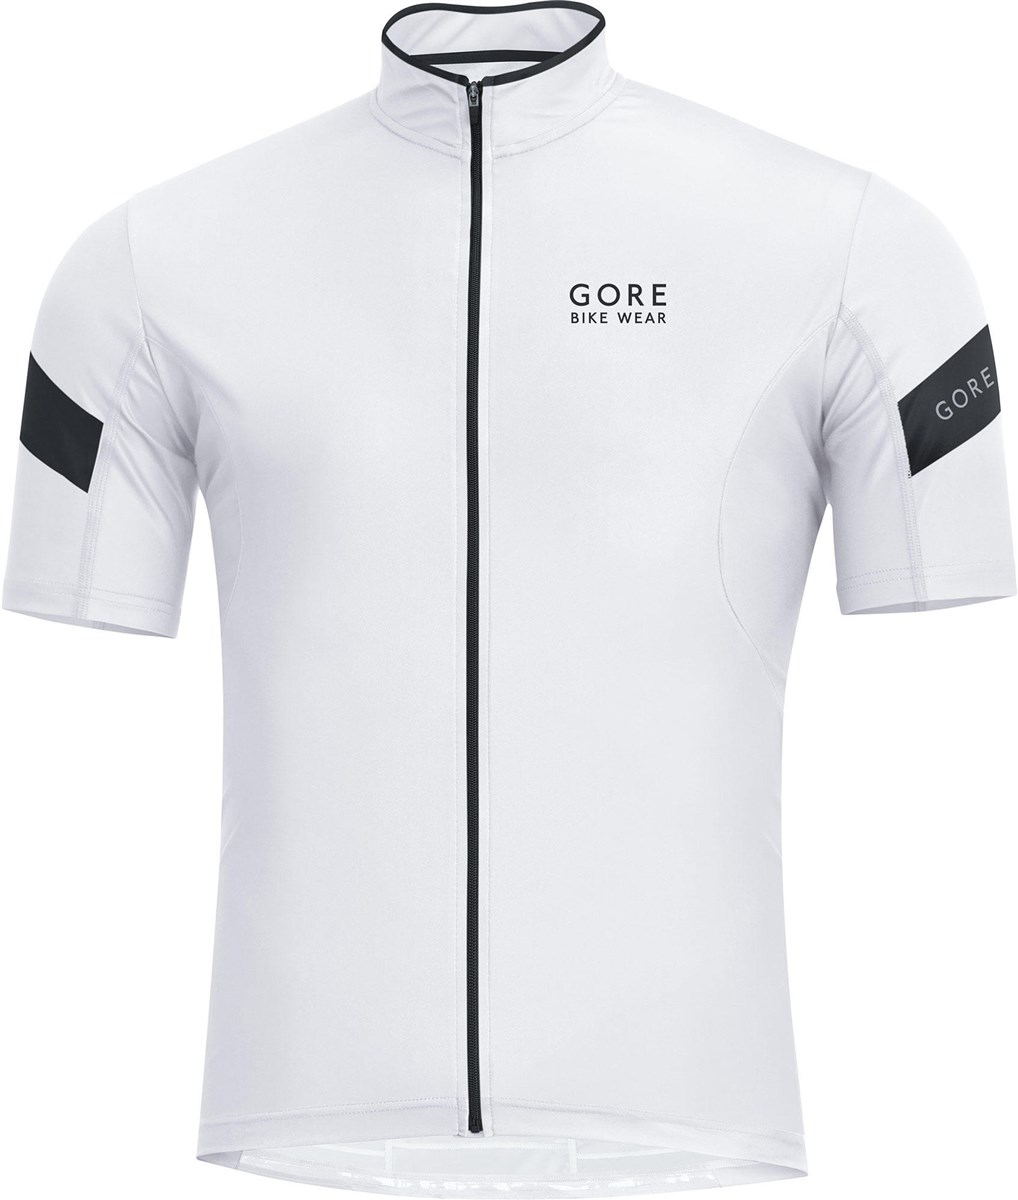 Gore Power 3.0 Short Sleeve Jersey SS17 product image